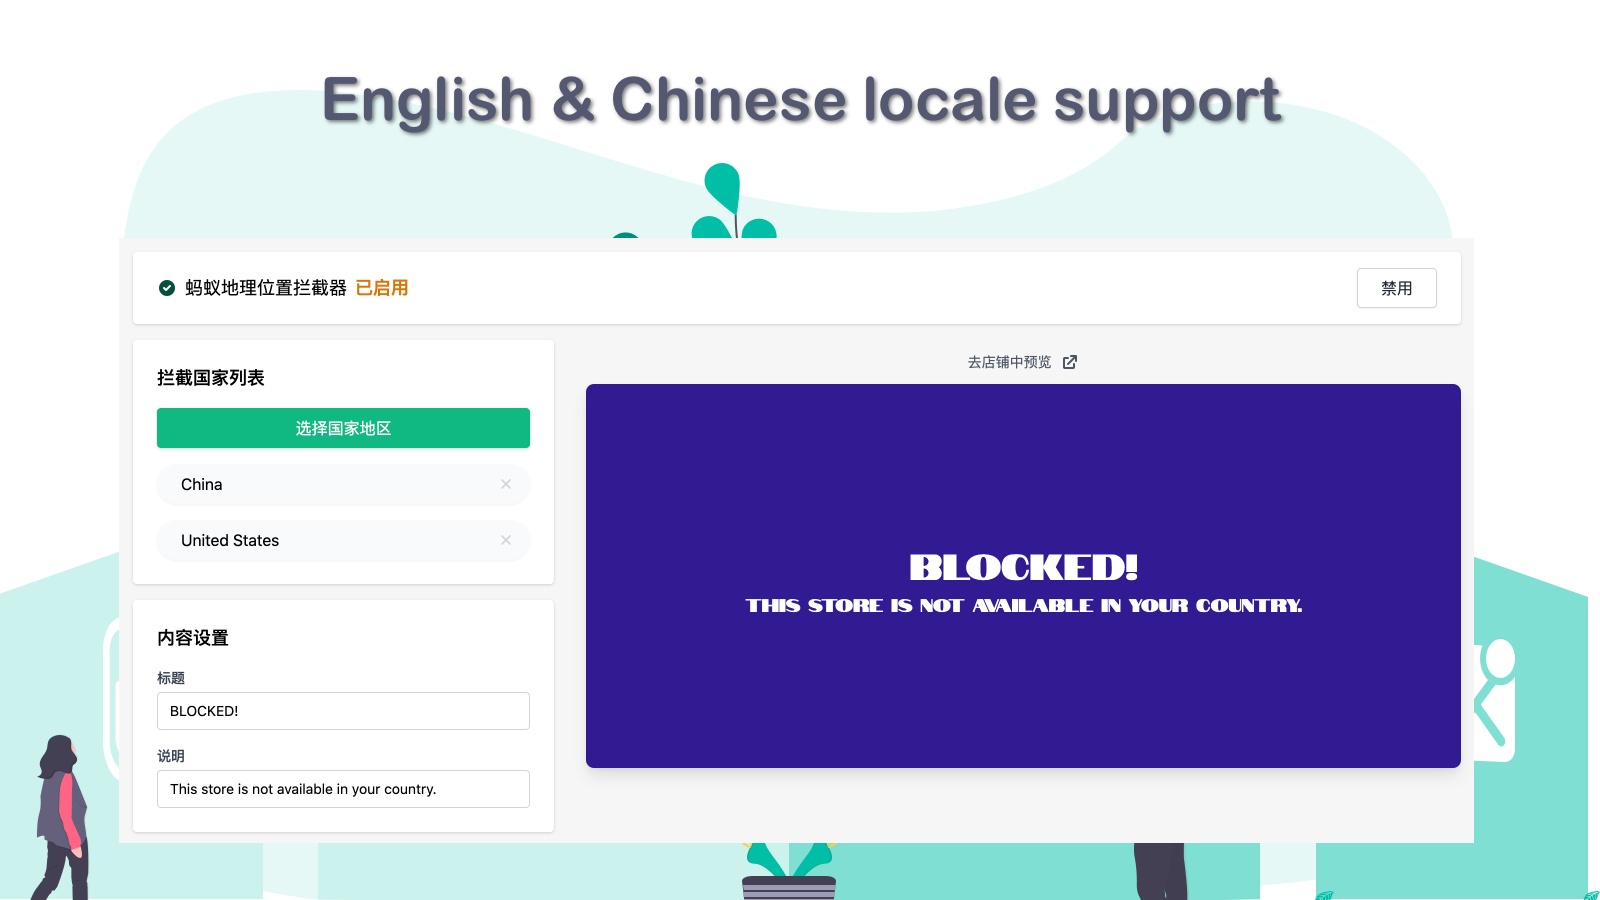 English & Chinese locale support